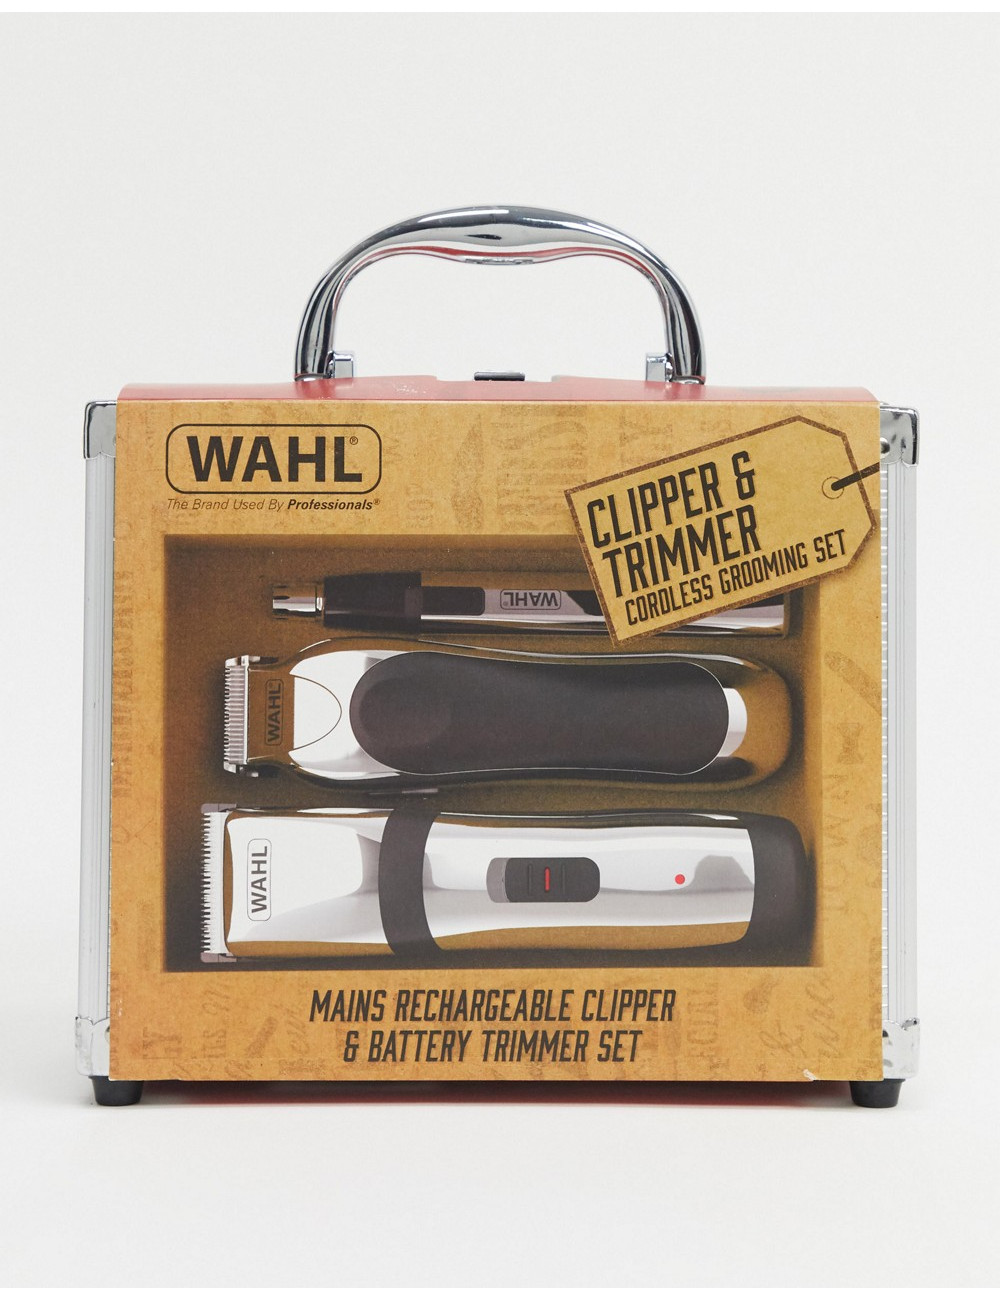 Wahl Clipper and Trimmer...